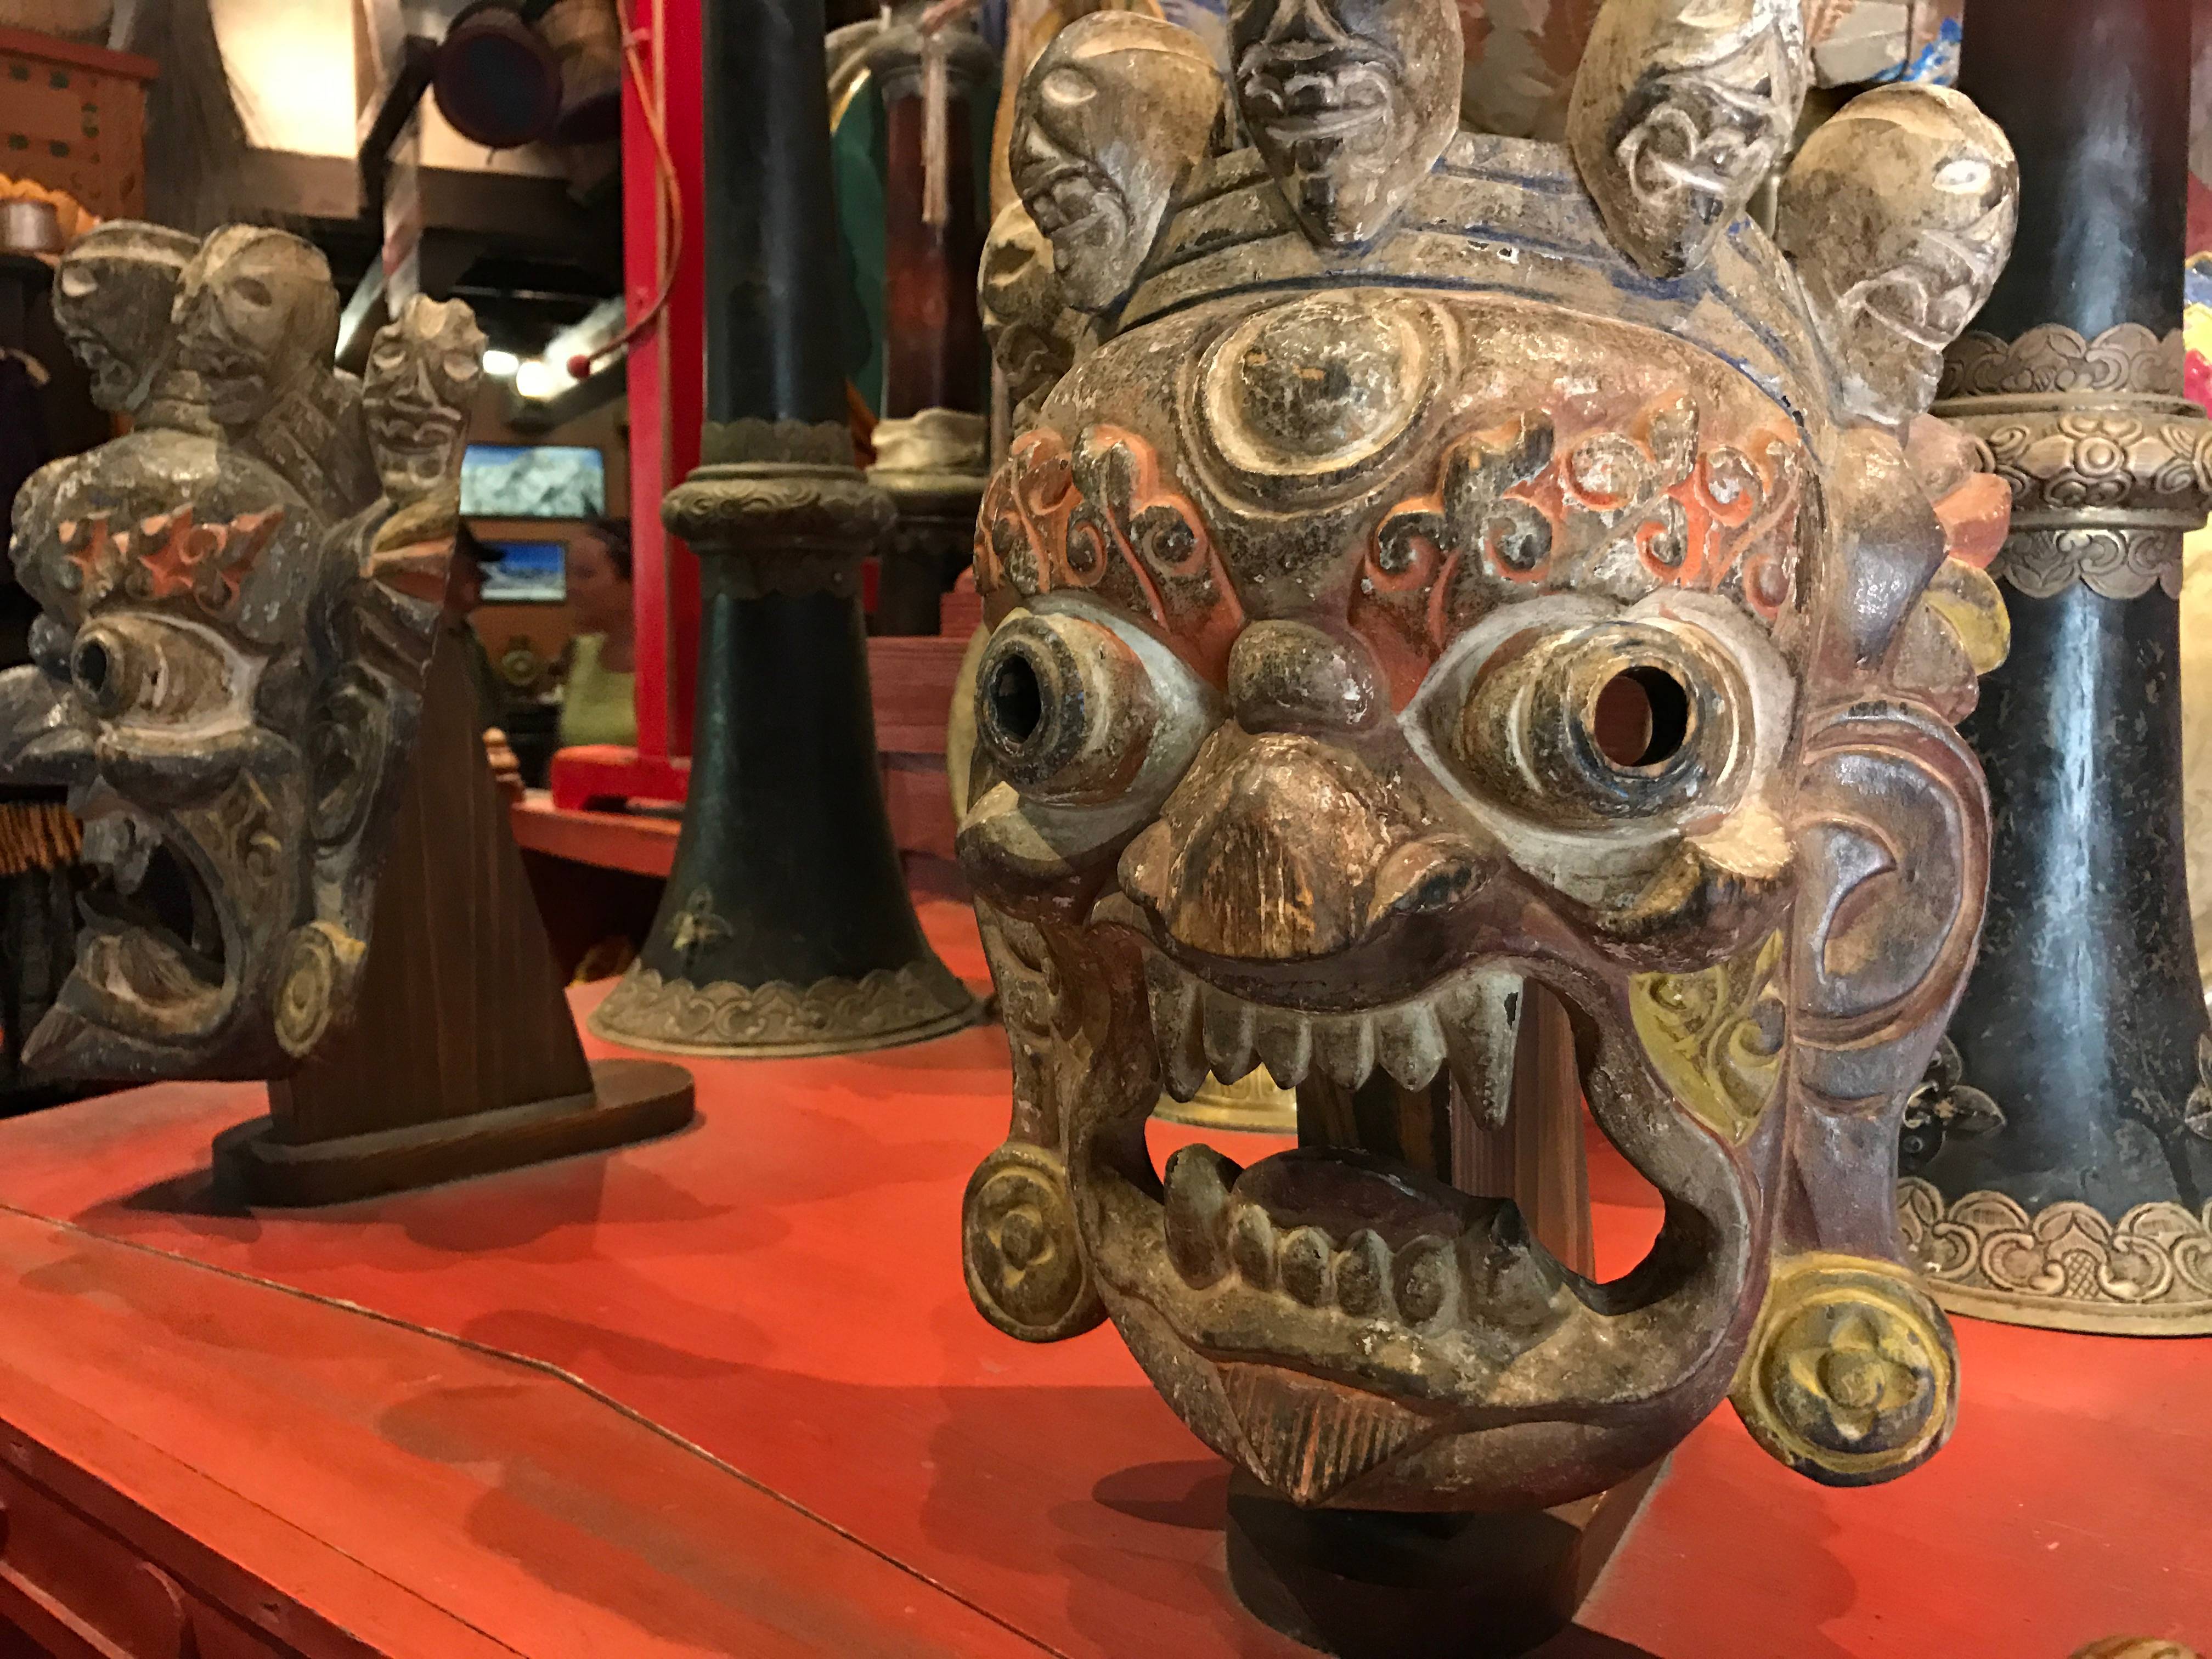 Close-up of a prop in the Expedition Everest gift shop